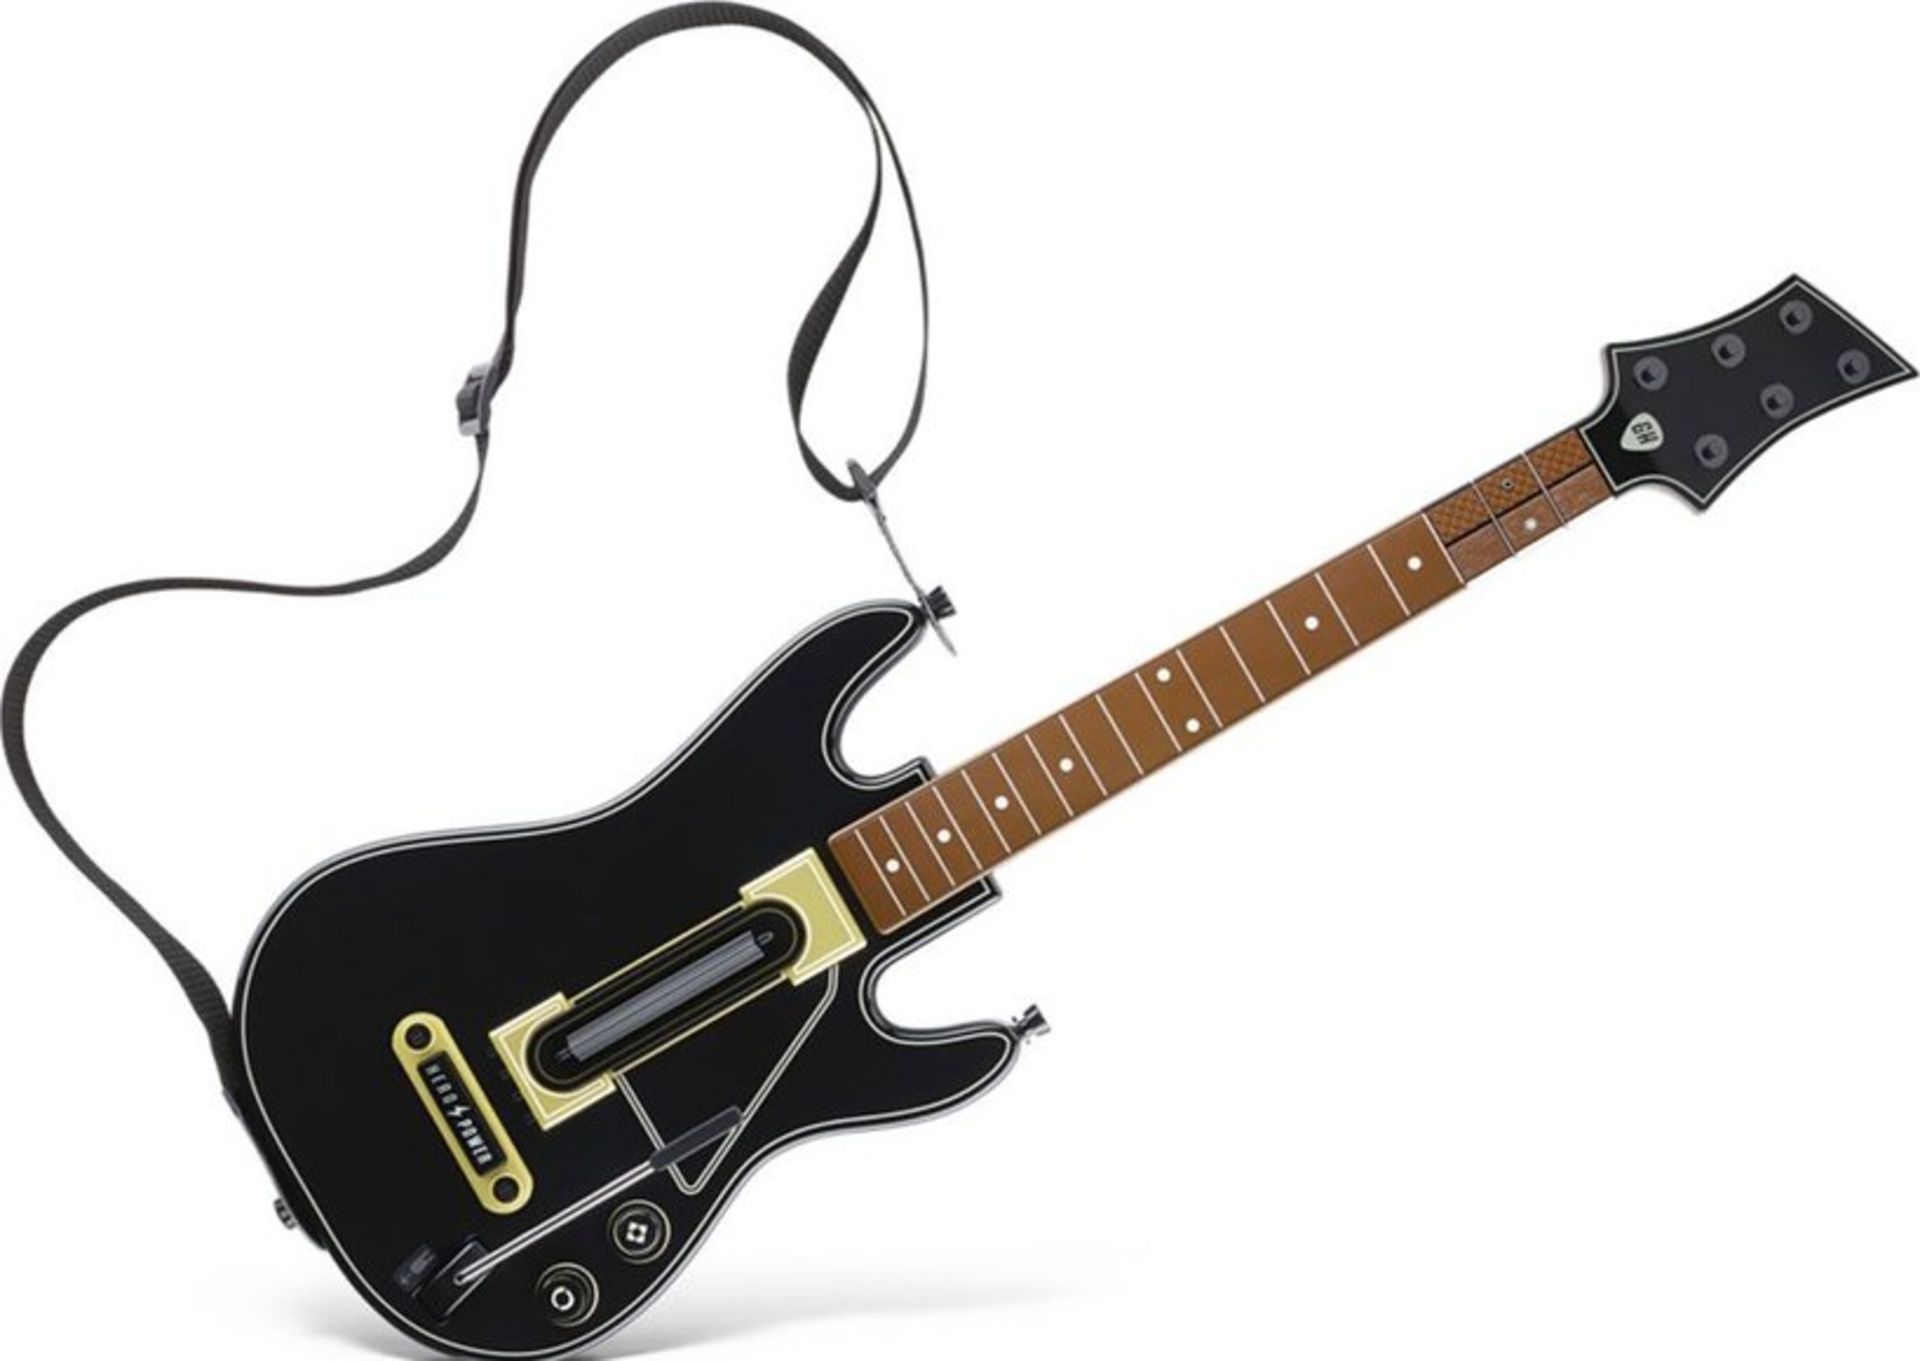 V Brand New Guitar Hero Live For iPhone iPad And iPod Touch Includes Video Game/Guitar Controller/ - Image 2 of 2